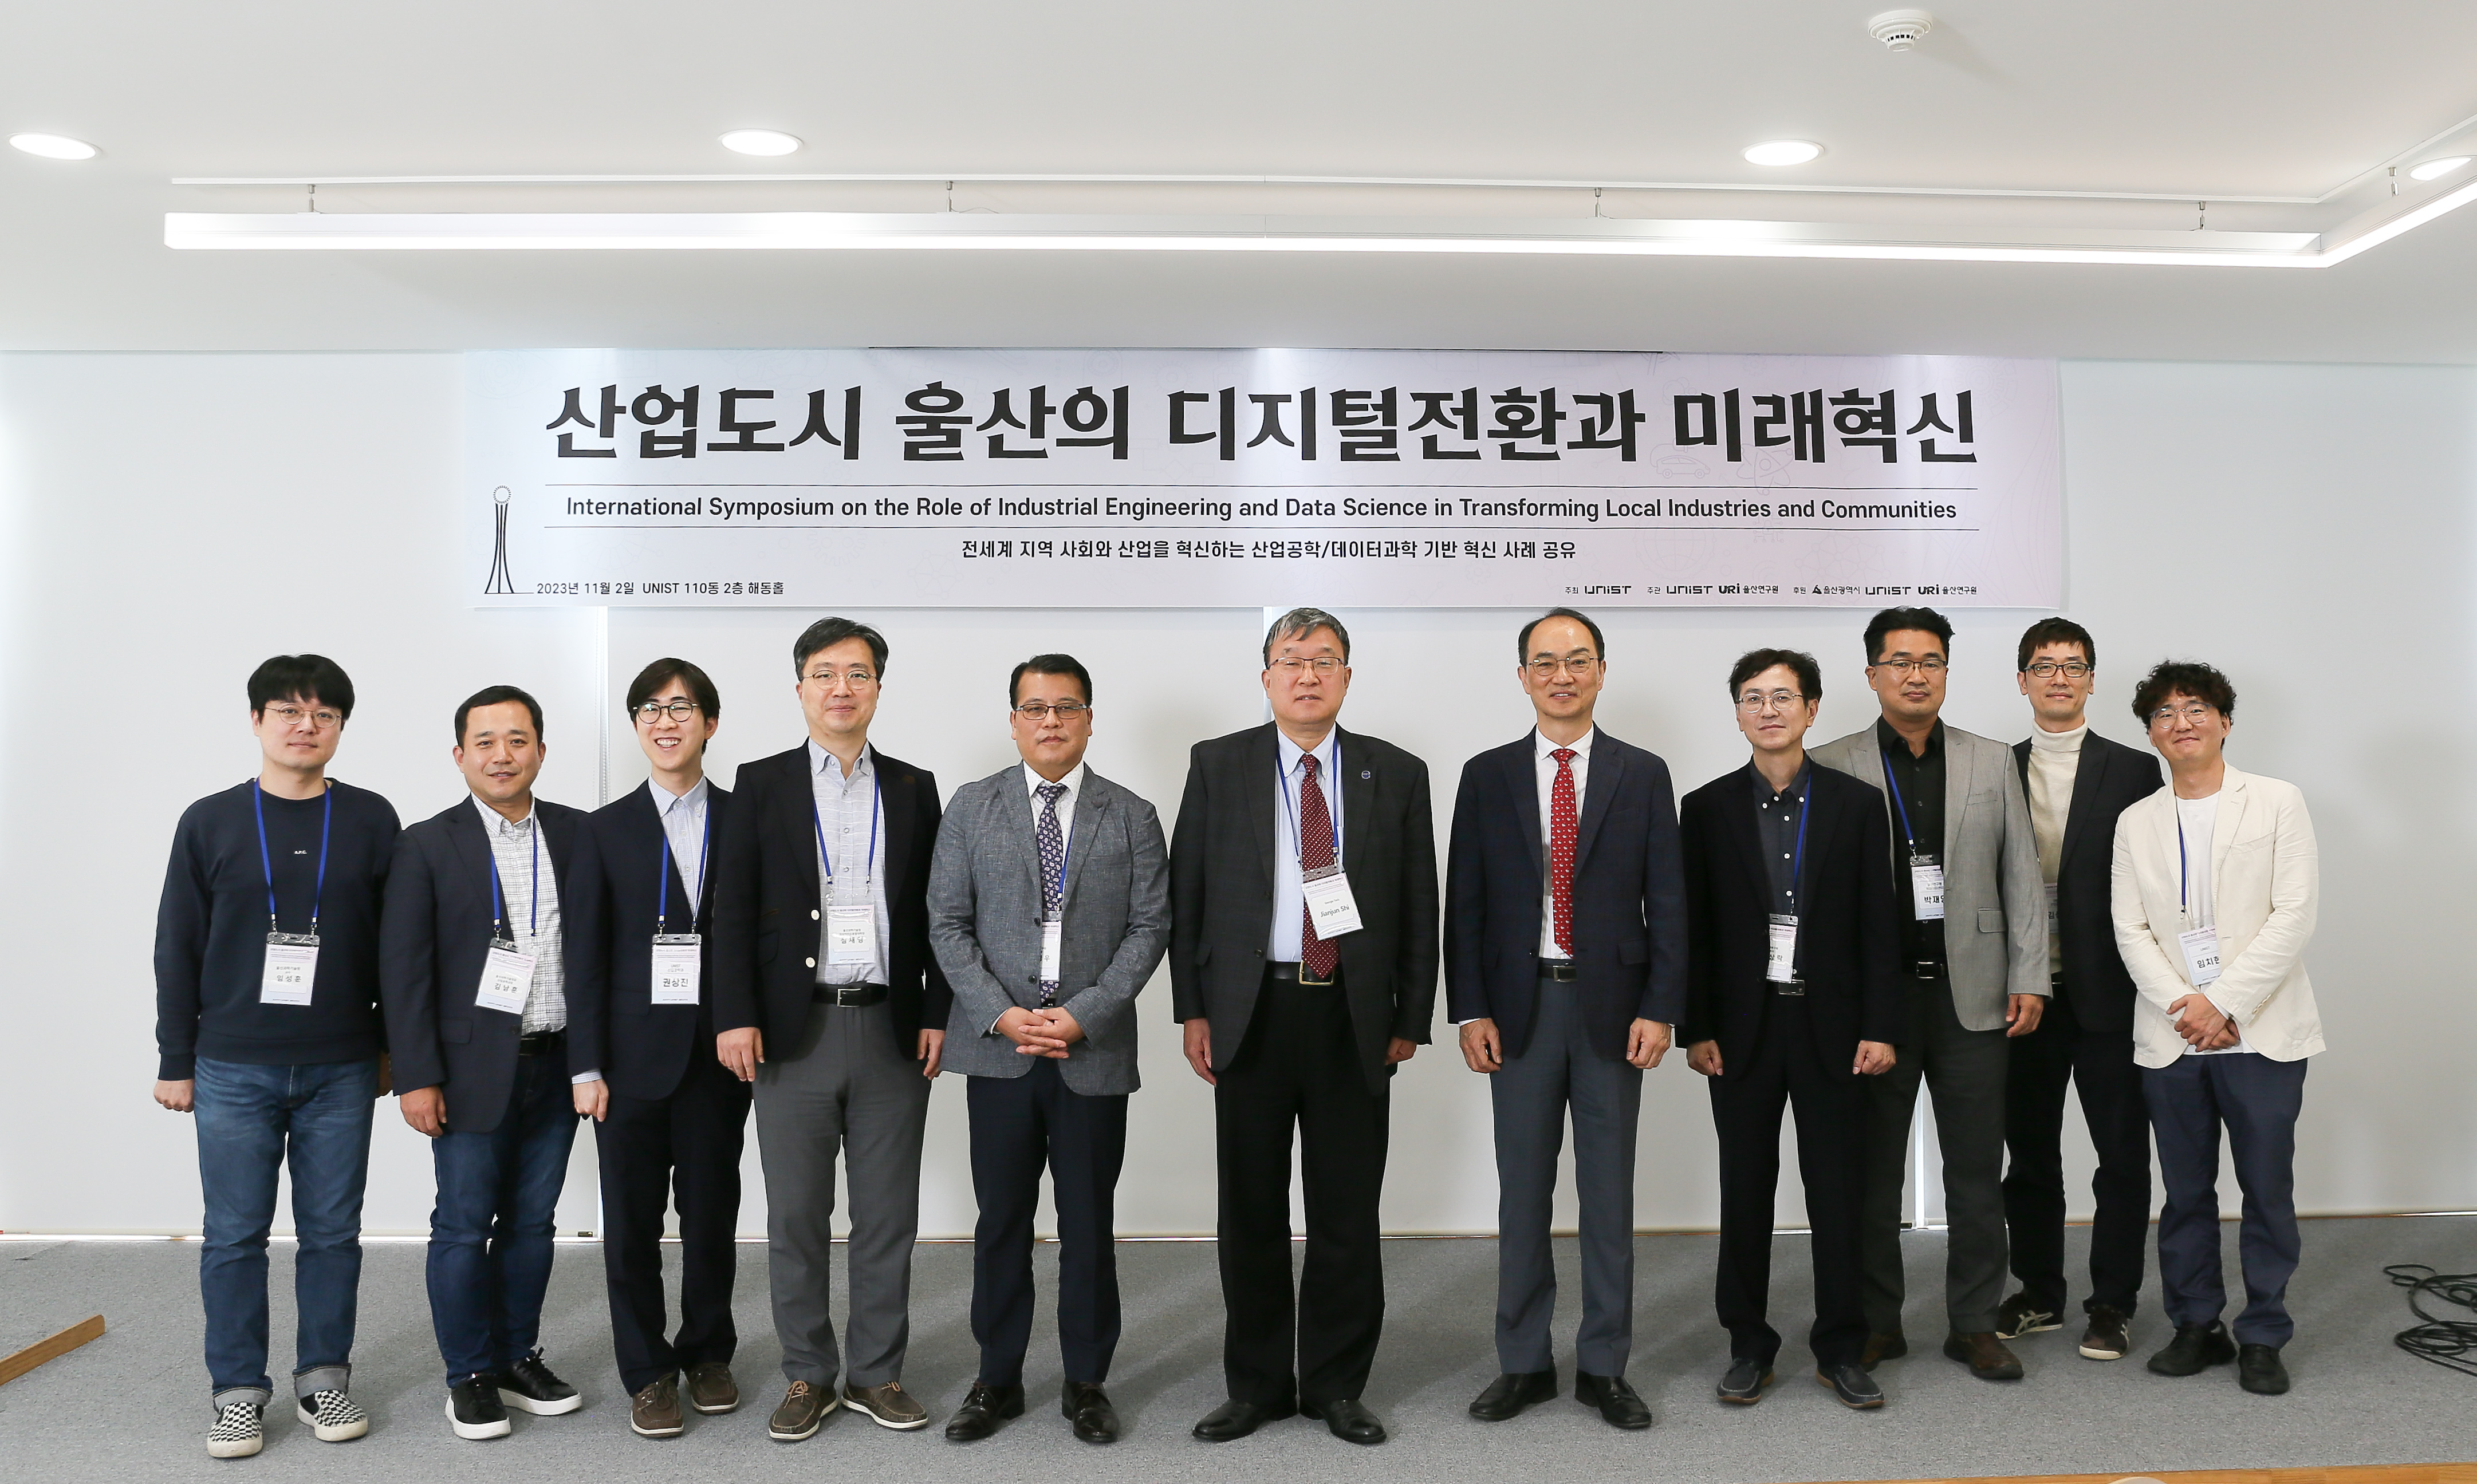 Group photograph taken at the ‘International Symposium on the Role of Industrial Engineering and Data Science in Transforming Local Industries and Communities’ on November 2, 2023.